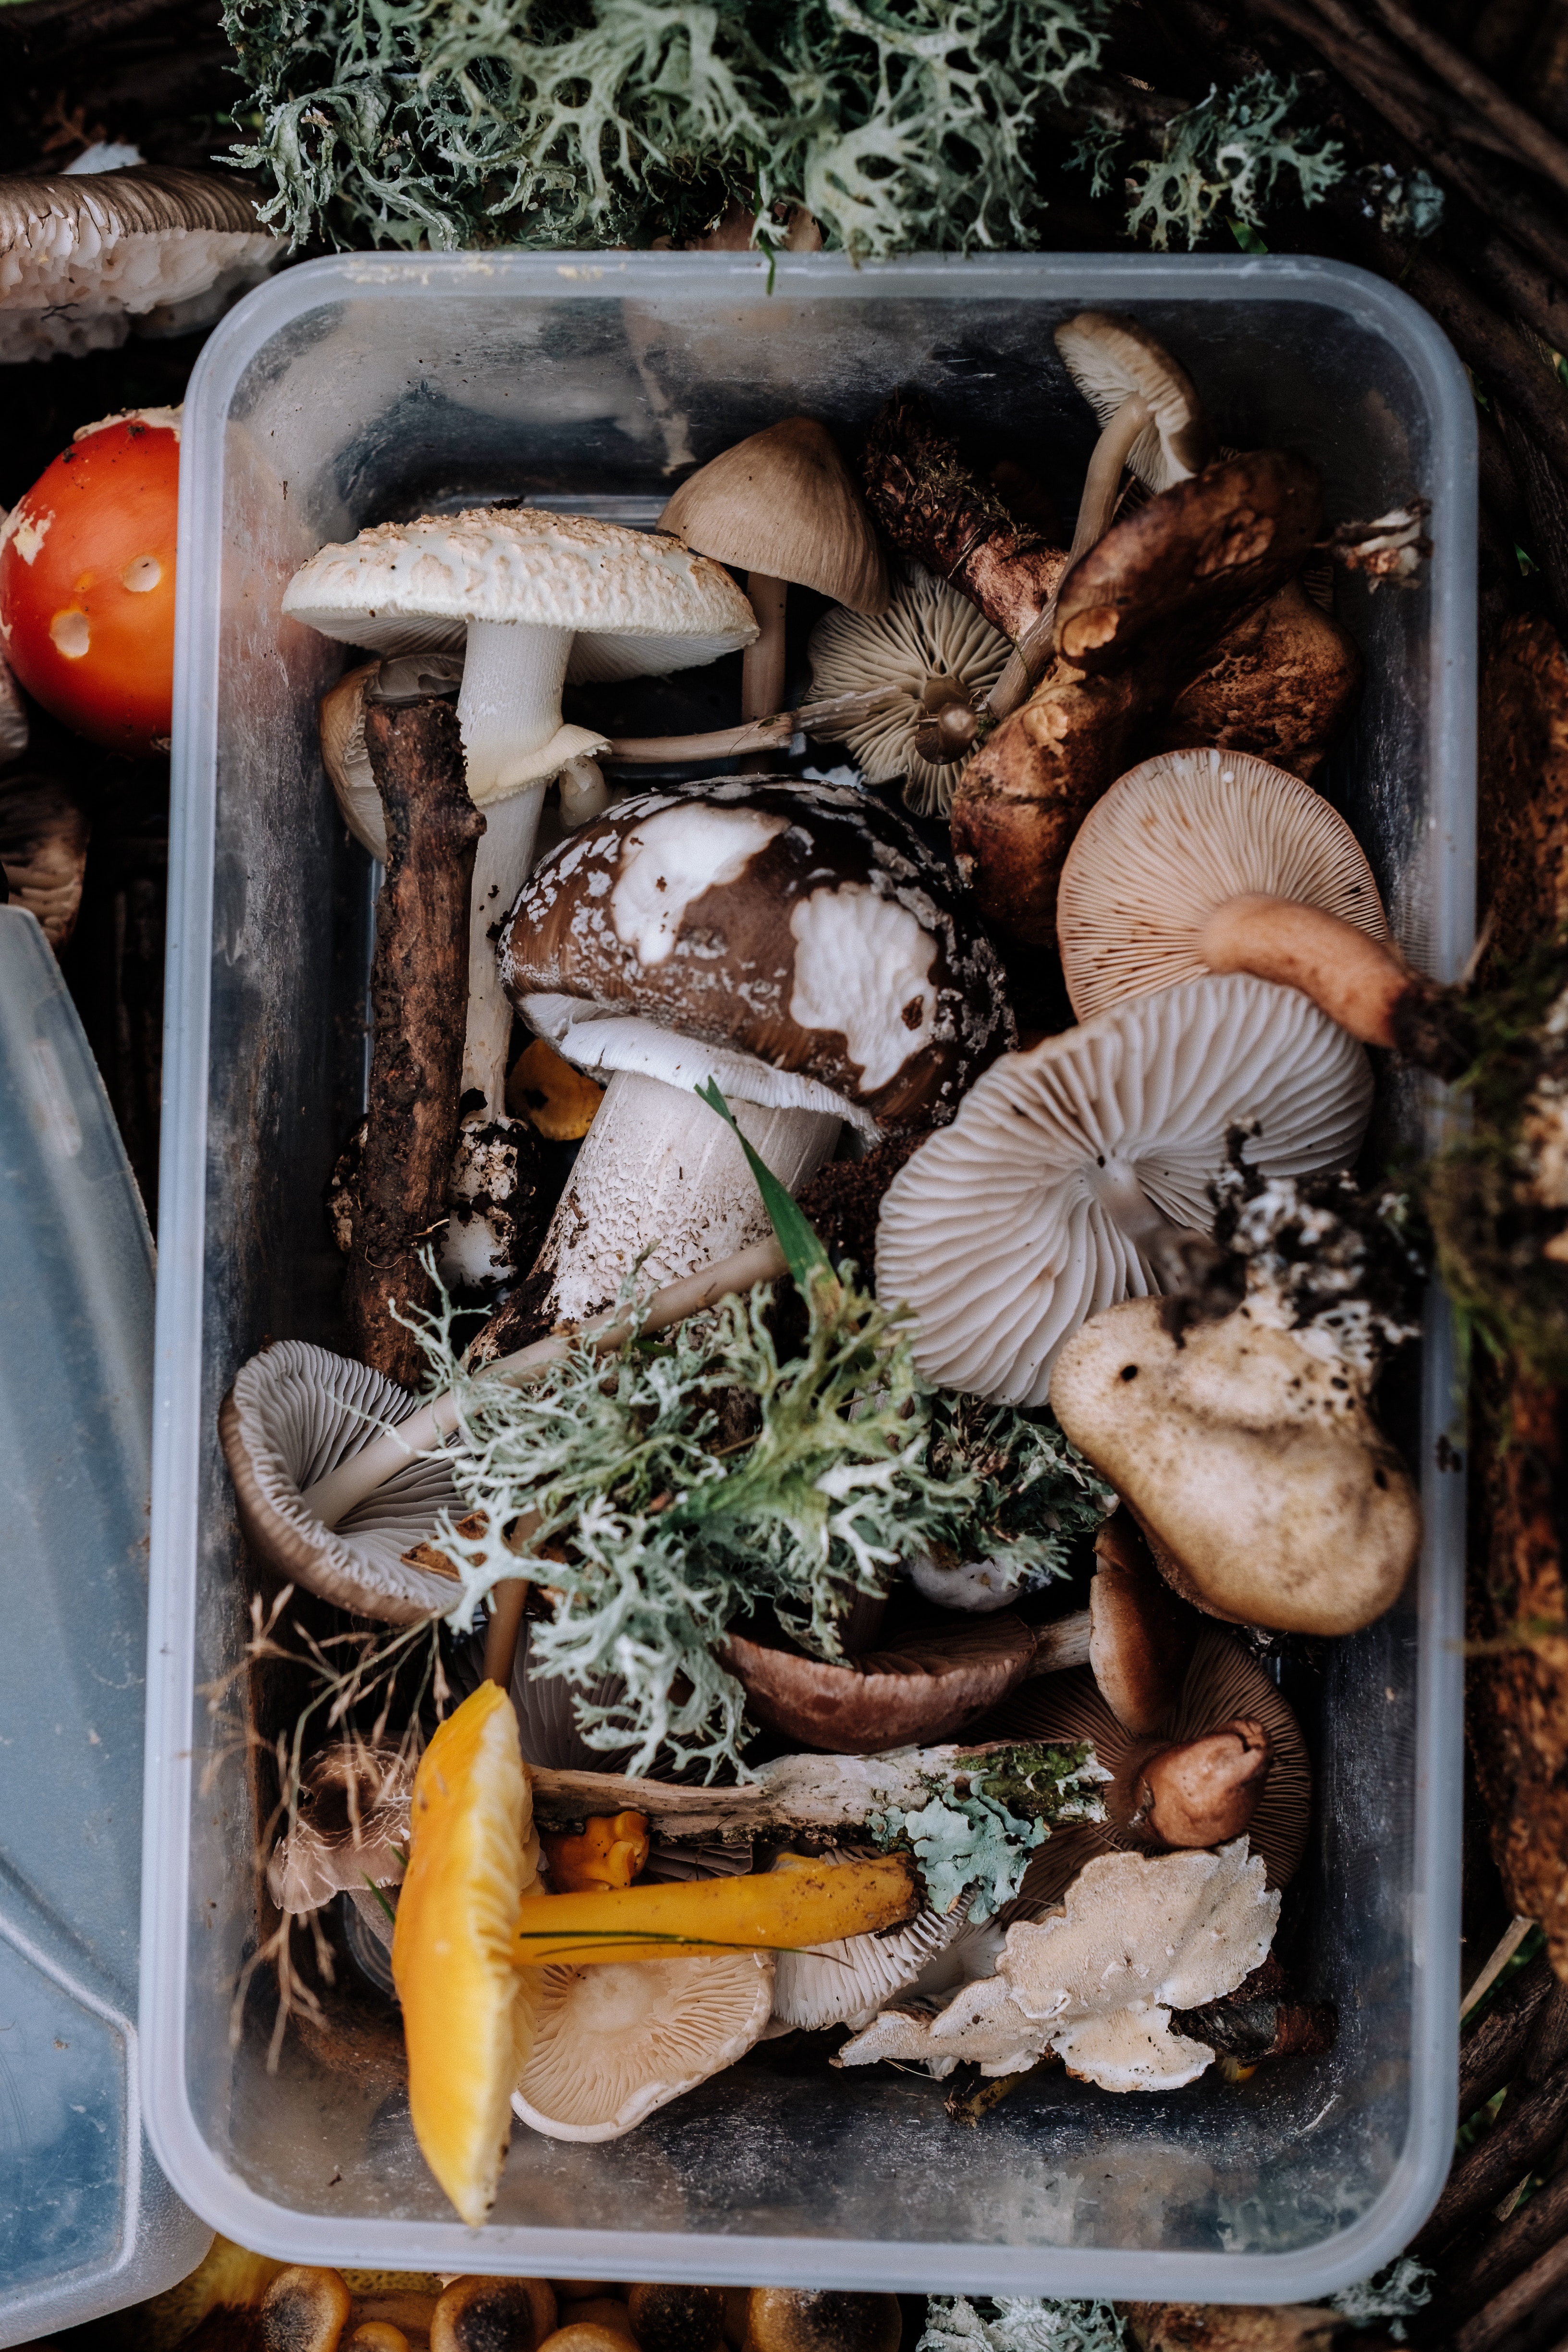 10 Amazing Mushrooms For Wellness (+ Free Mushroom Download) | Herbal Academy | Learn how you can use 10 amazing mushrooms for wellness, and get a free mushroom graphic download to help you remember them too.